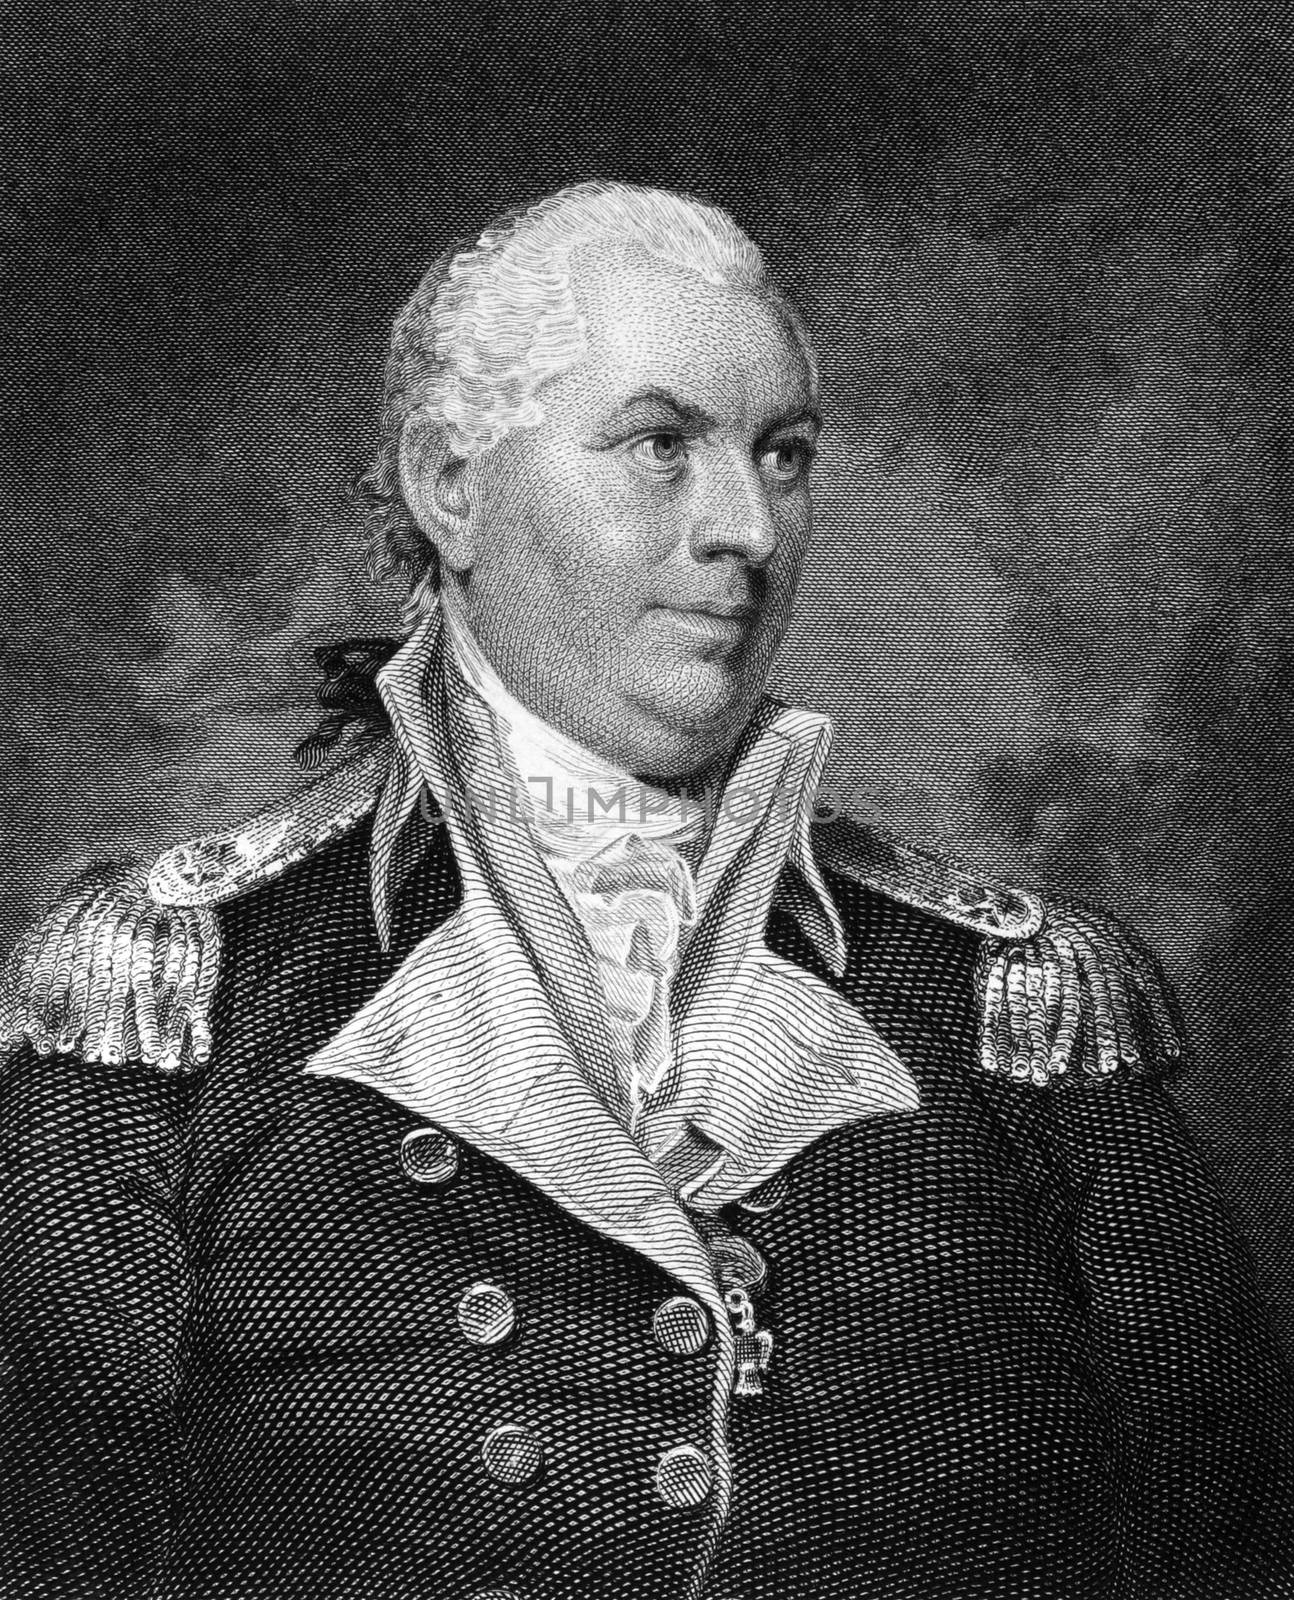 John Barry (1745-1803) on engraving from 1835. Officer in the Continental Navy during the American Revolutionary War. Engraved by J.B.Longacre and published in''National Portrait Gallery of Distinguished Americans Volume II'',USA,1835.